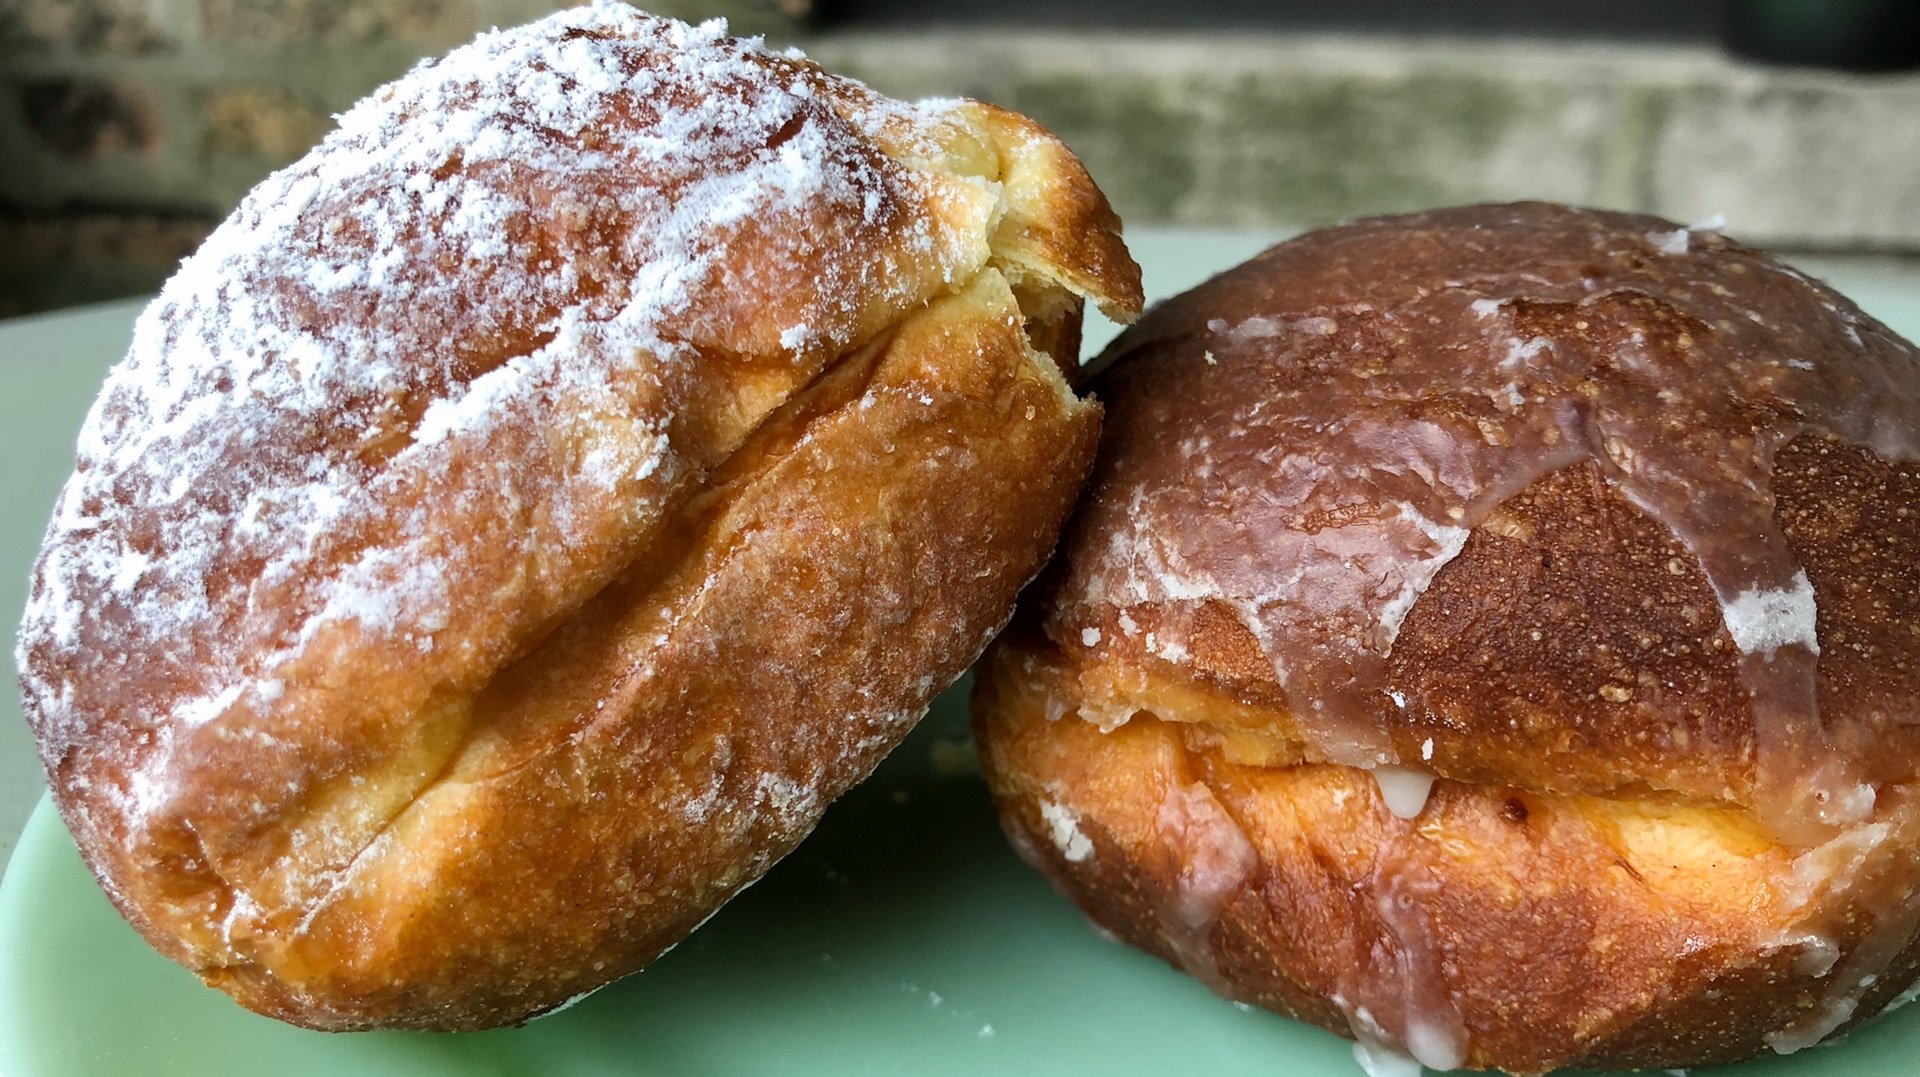 Chicago bakeries will sell tens of thousands of paczki on Fat Tuesday. Patty Wetli/WTTW